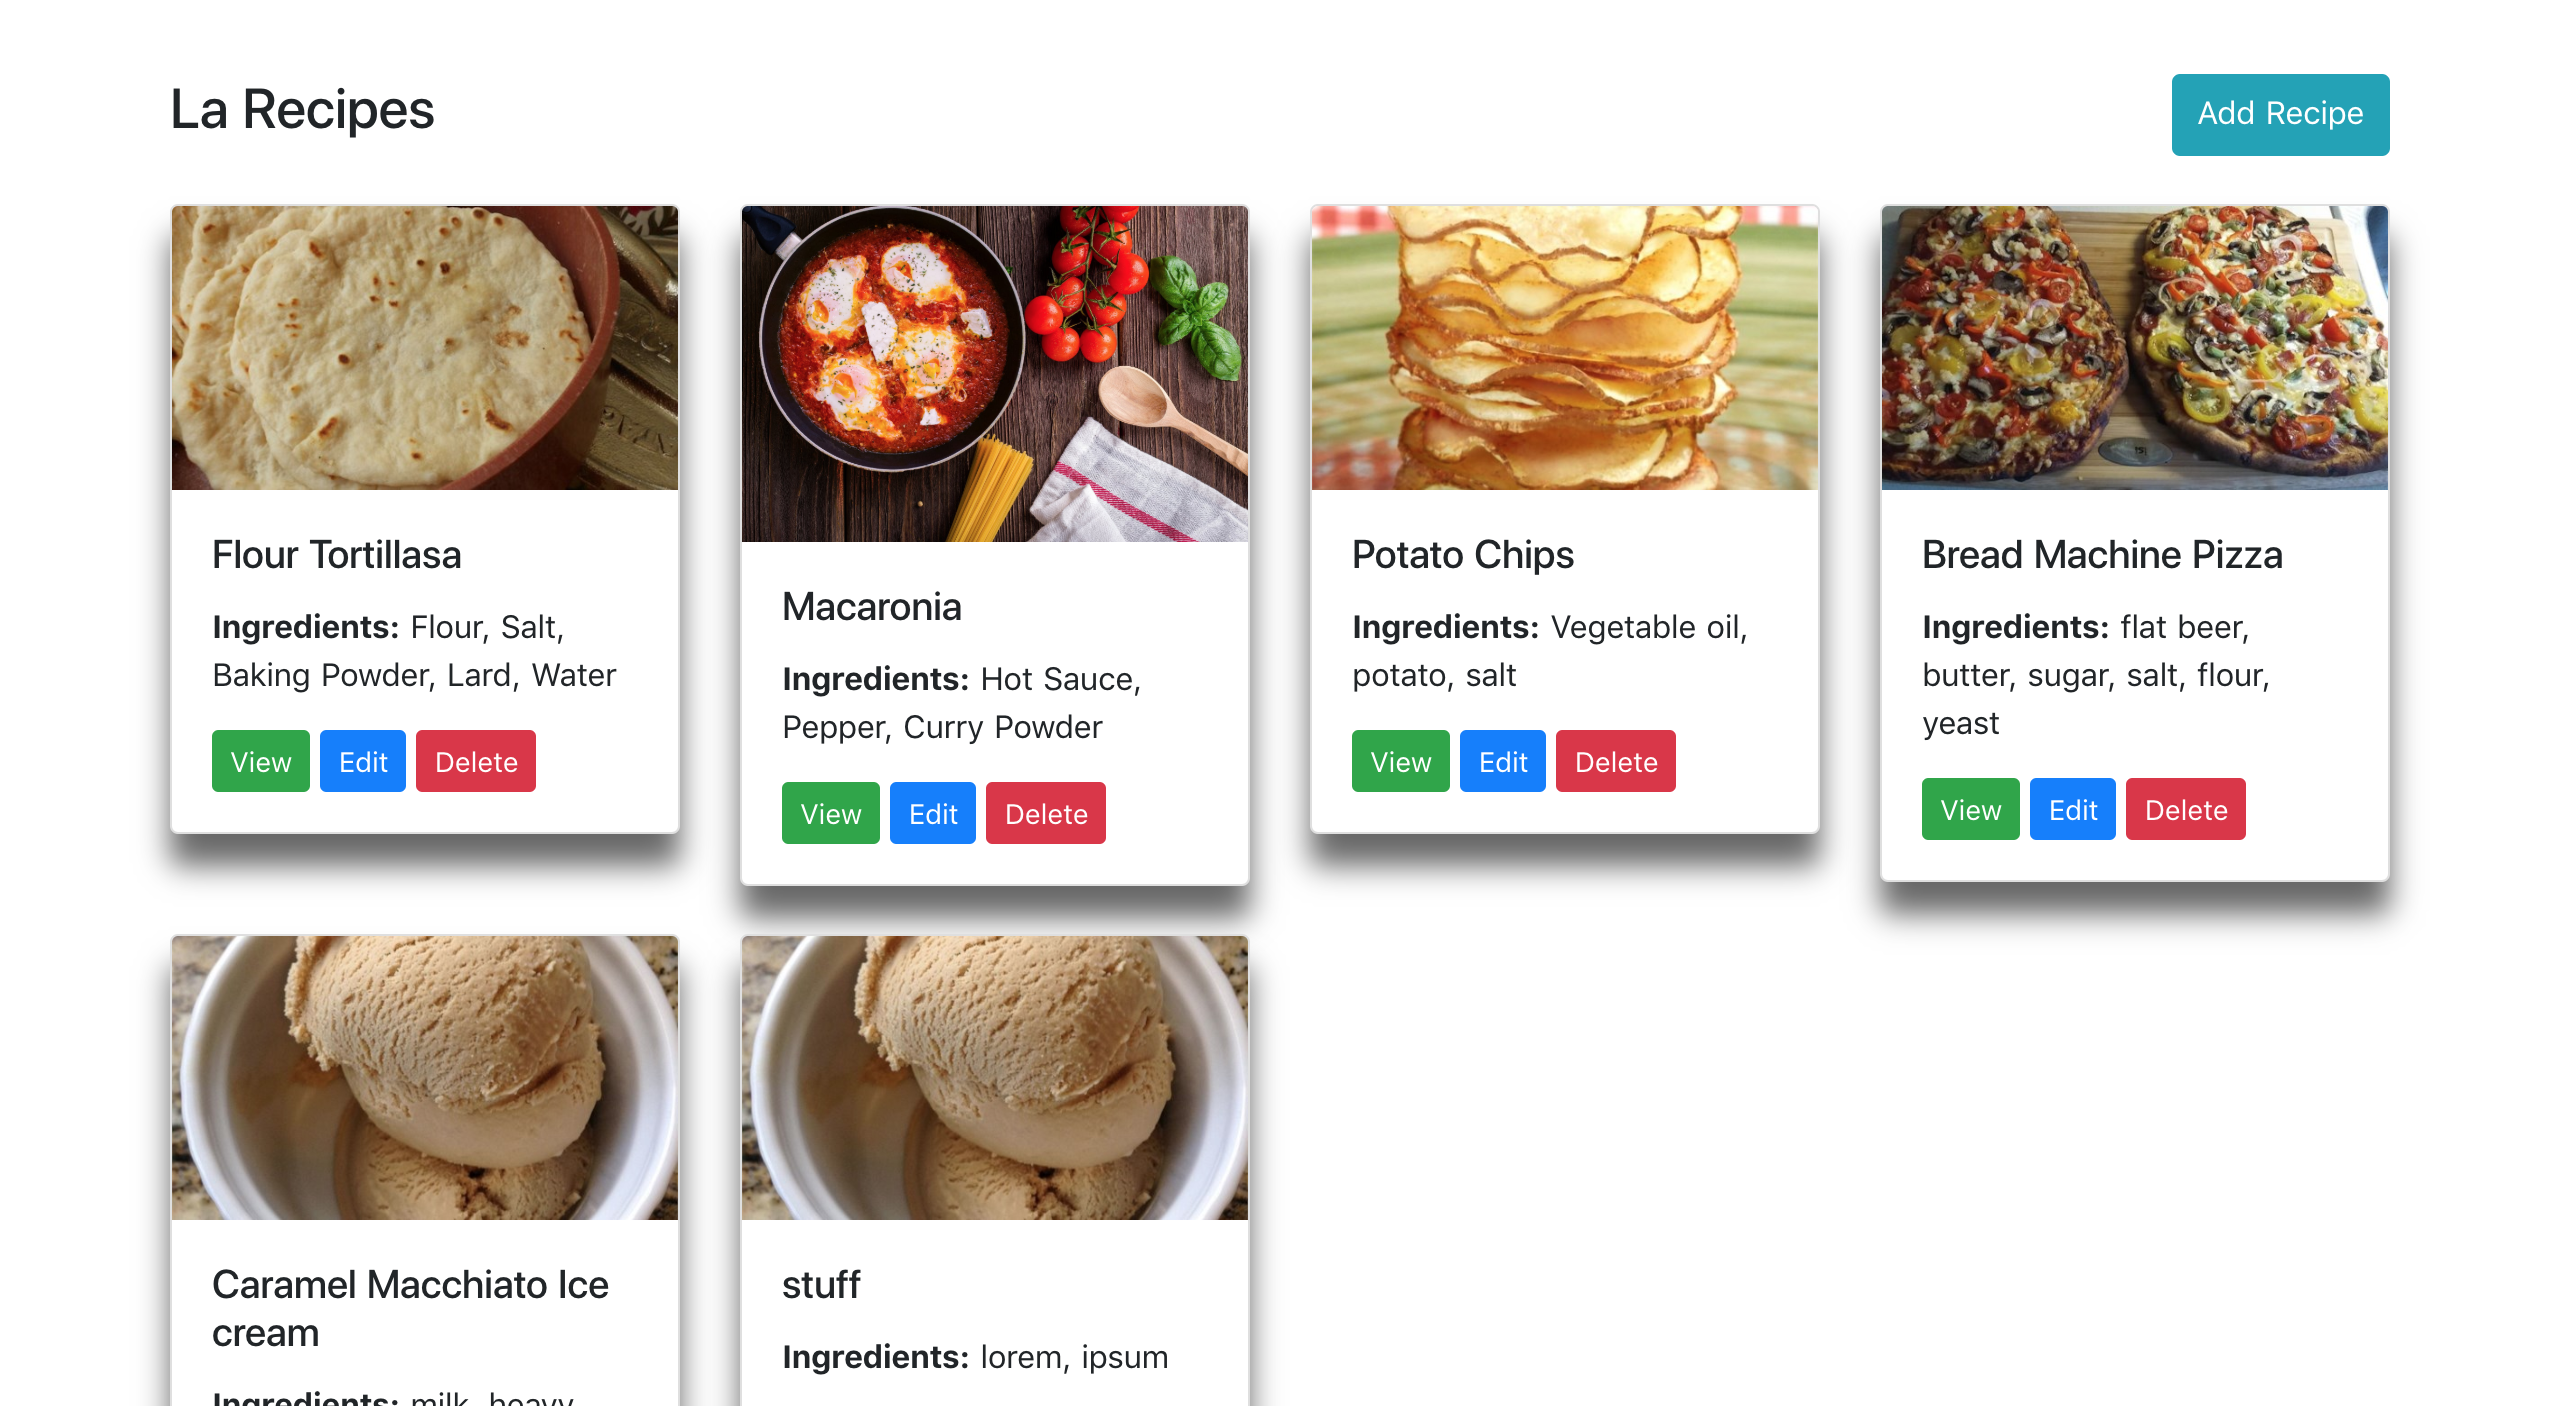 Recipes page with 6 recipe cards and the "Add Recipe" button on the right-hand side